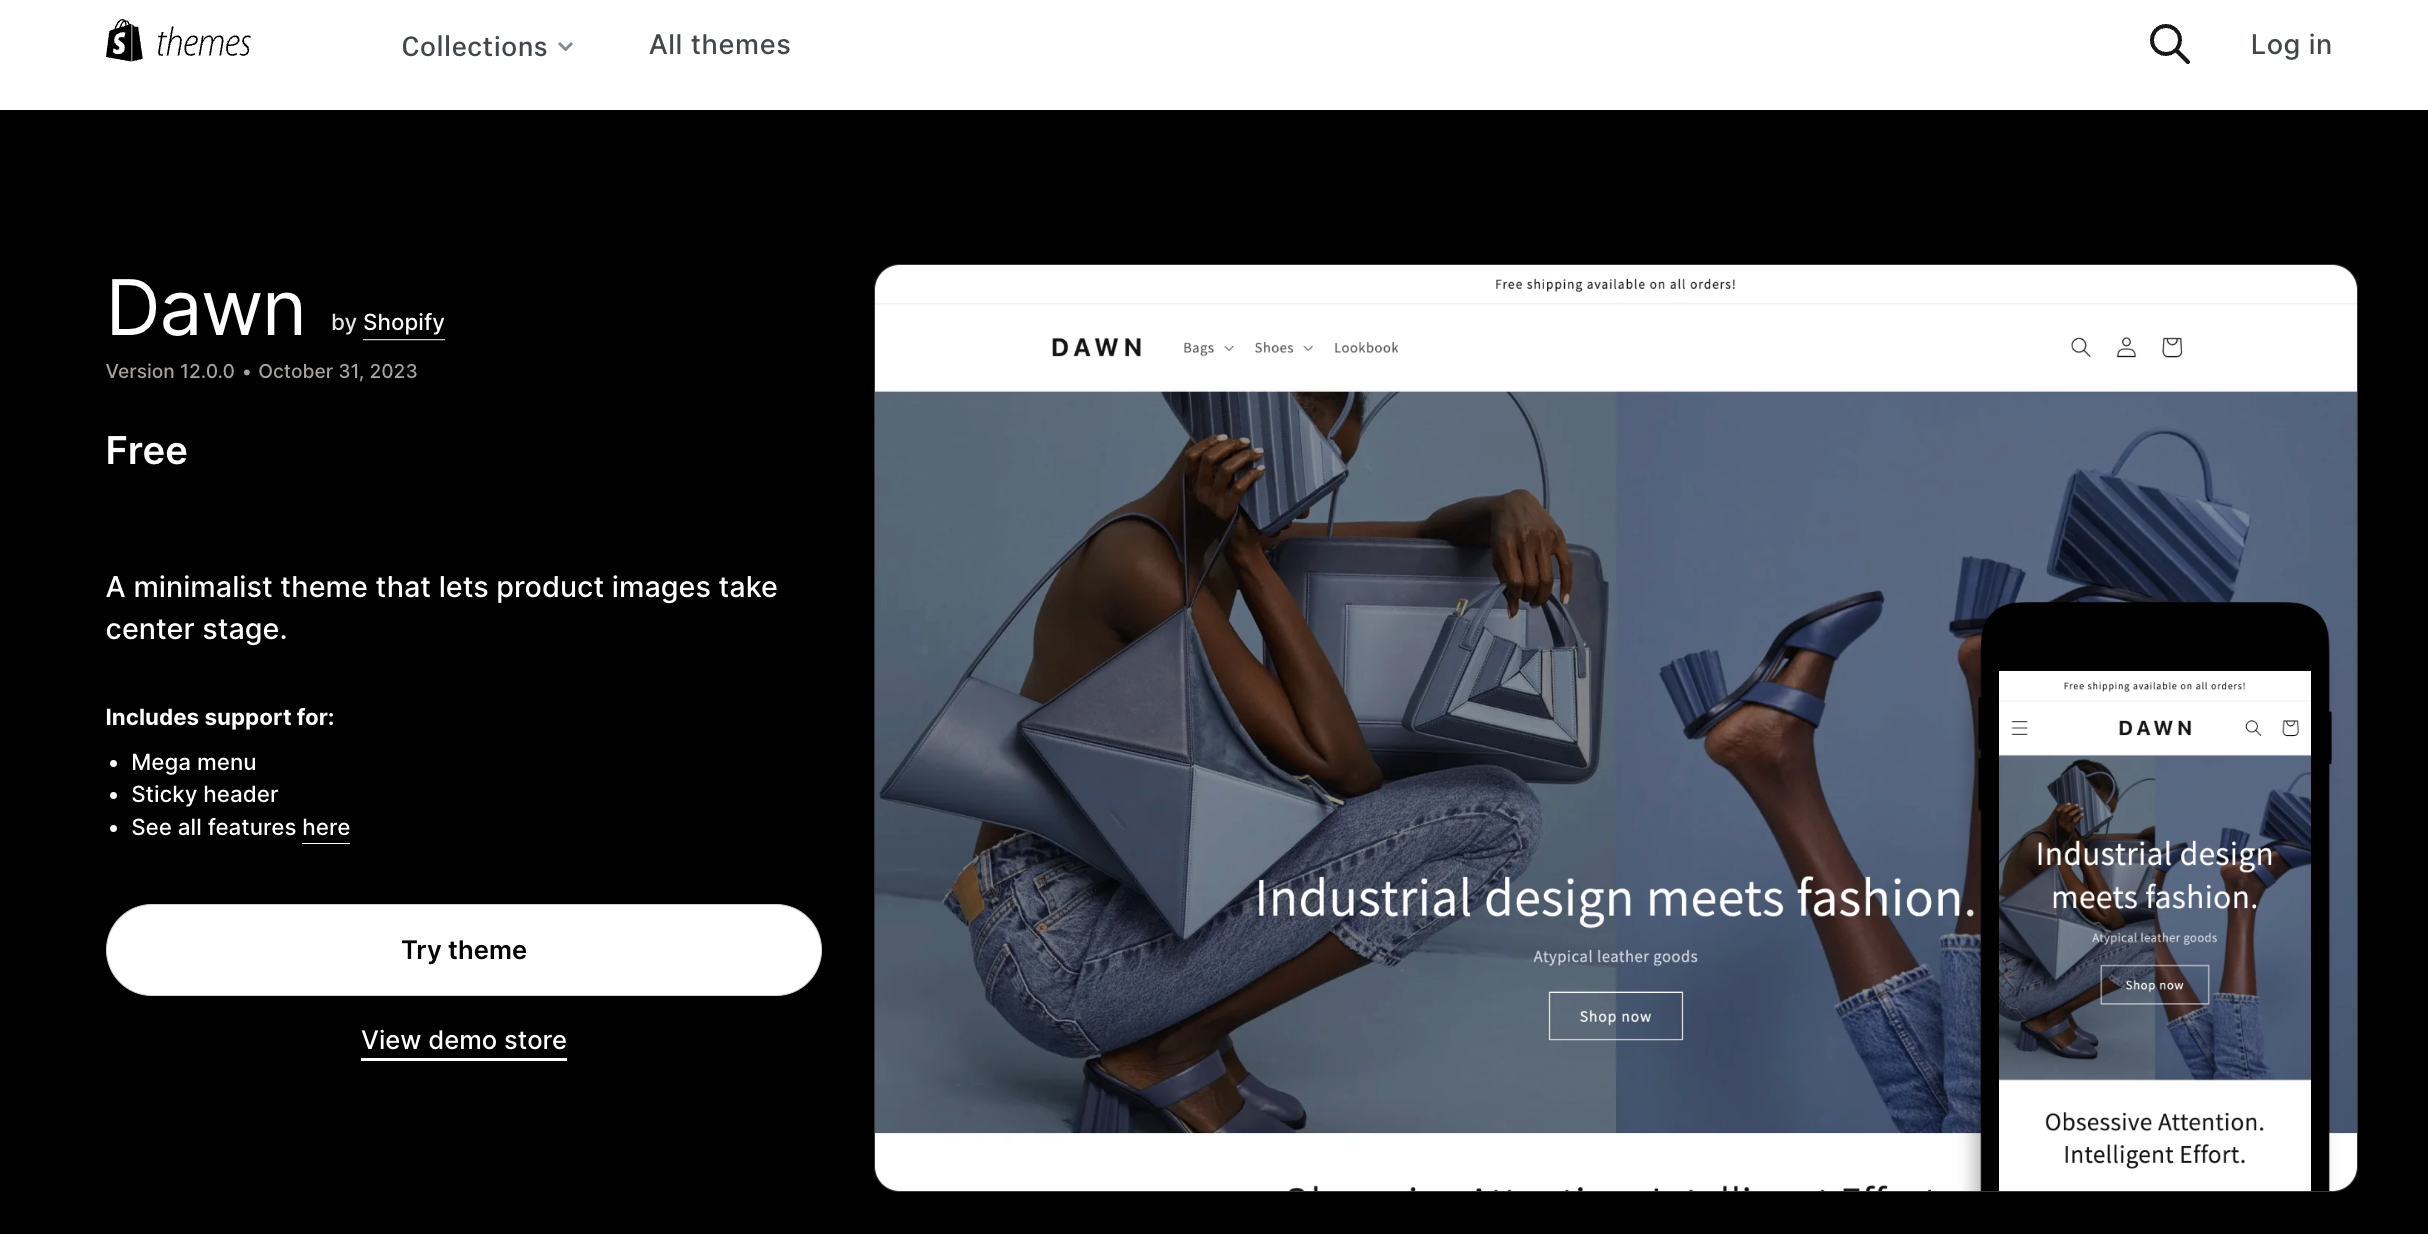 Dawn- Minimalist theme that lets product images take center stage